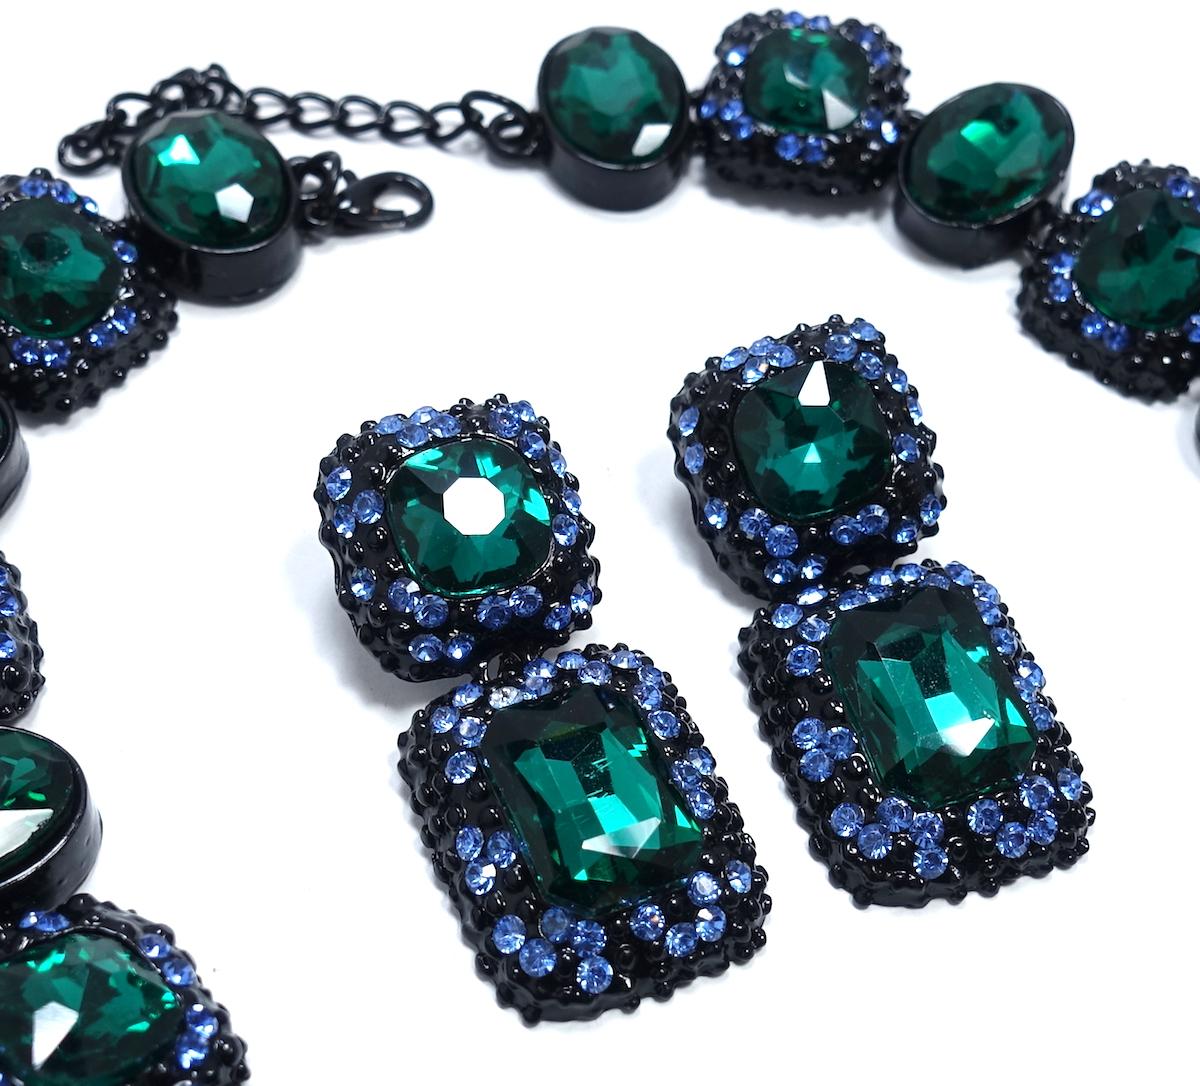 This stunning necklace & earrings feature rich emerald green square and oval shaped crystals with blue crystal accents in a black Japanned setting. The necklace measures 18-1/2” x 3/4” and the front drop is 2-1/2” x 1-1/2” wide. The matching pierced